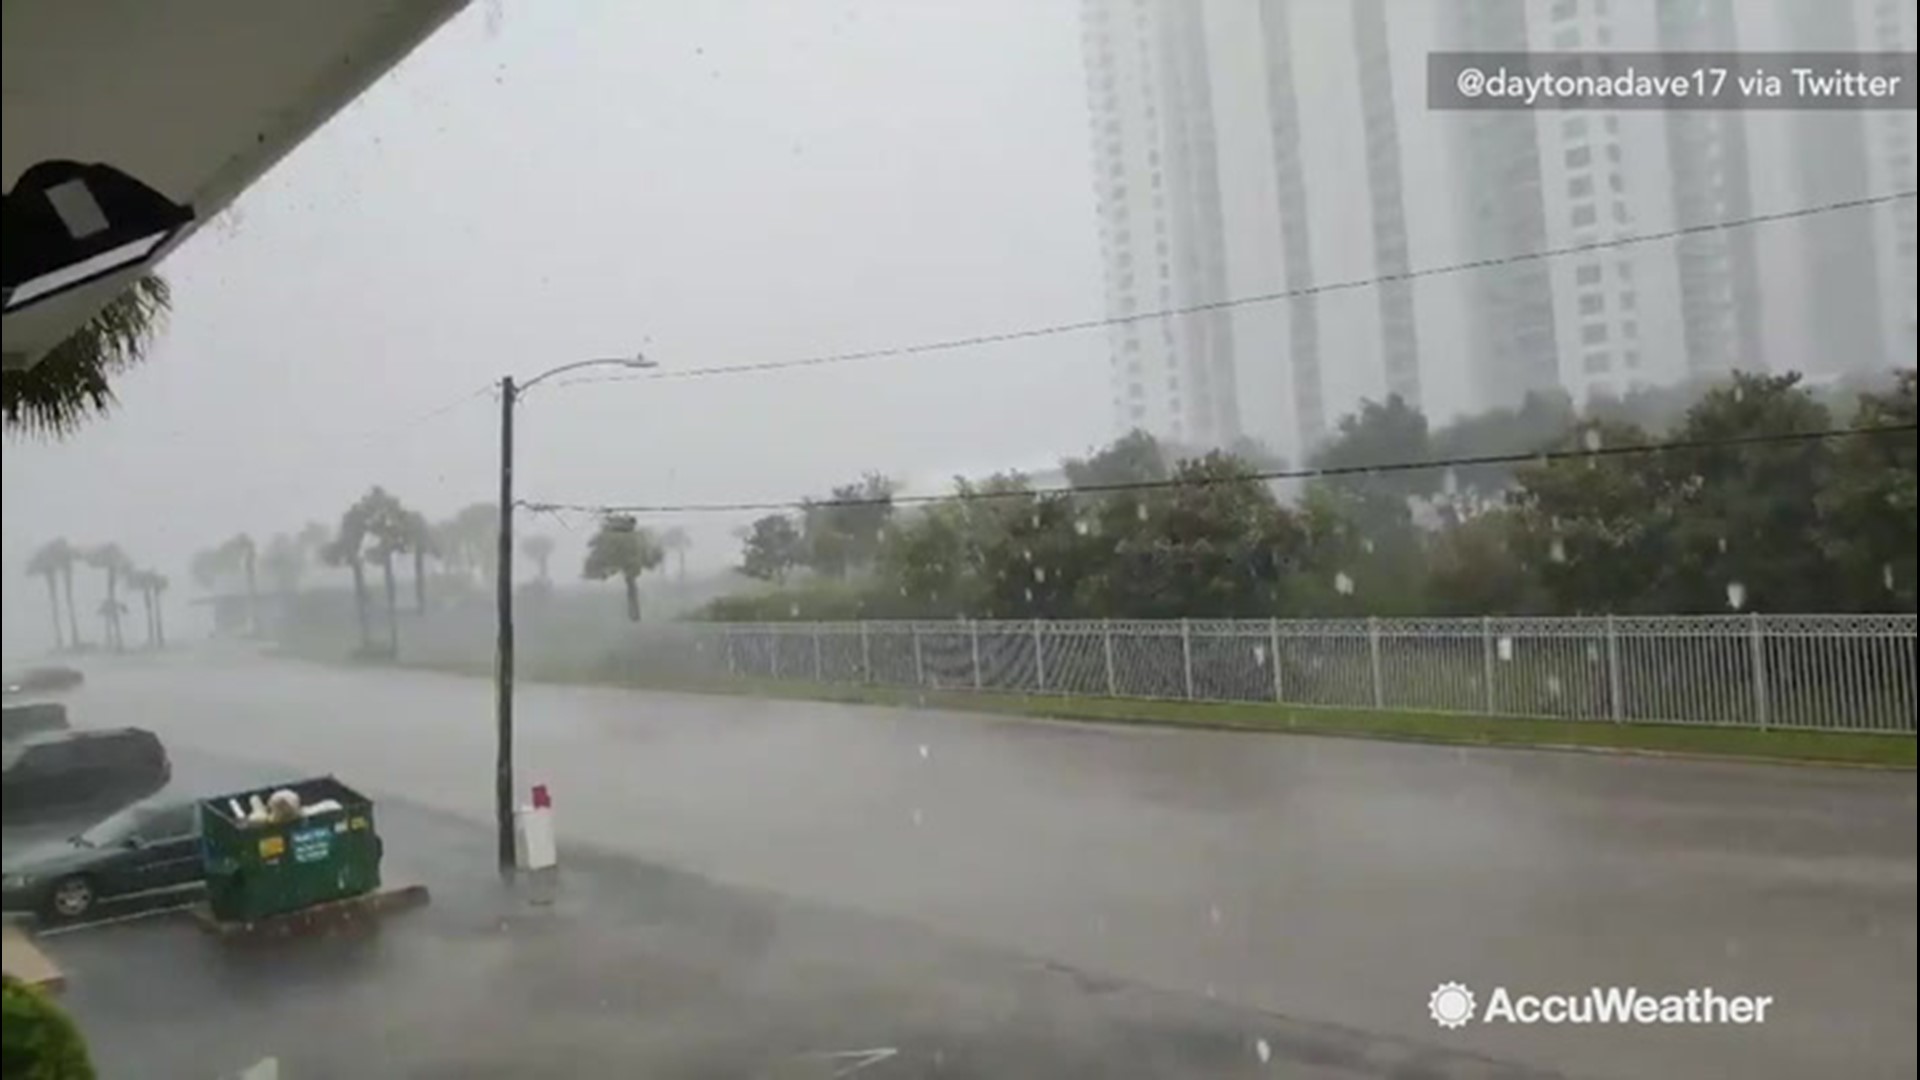 Violent storms rocked Daytona Beach, Florida, with high speed winds and heavy rain. The storm, which occurred on June 19, happened while other parts of the state were already in severe weather advisories.